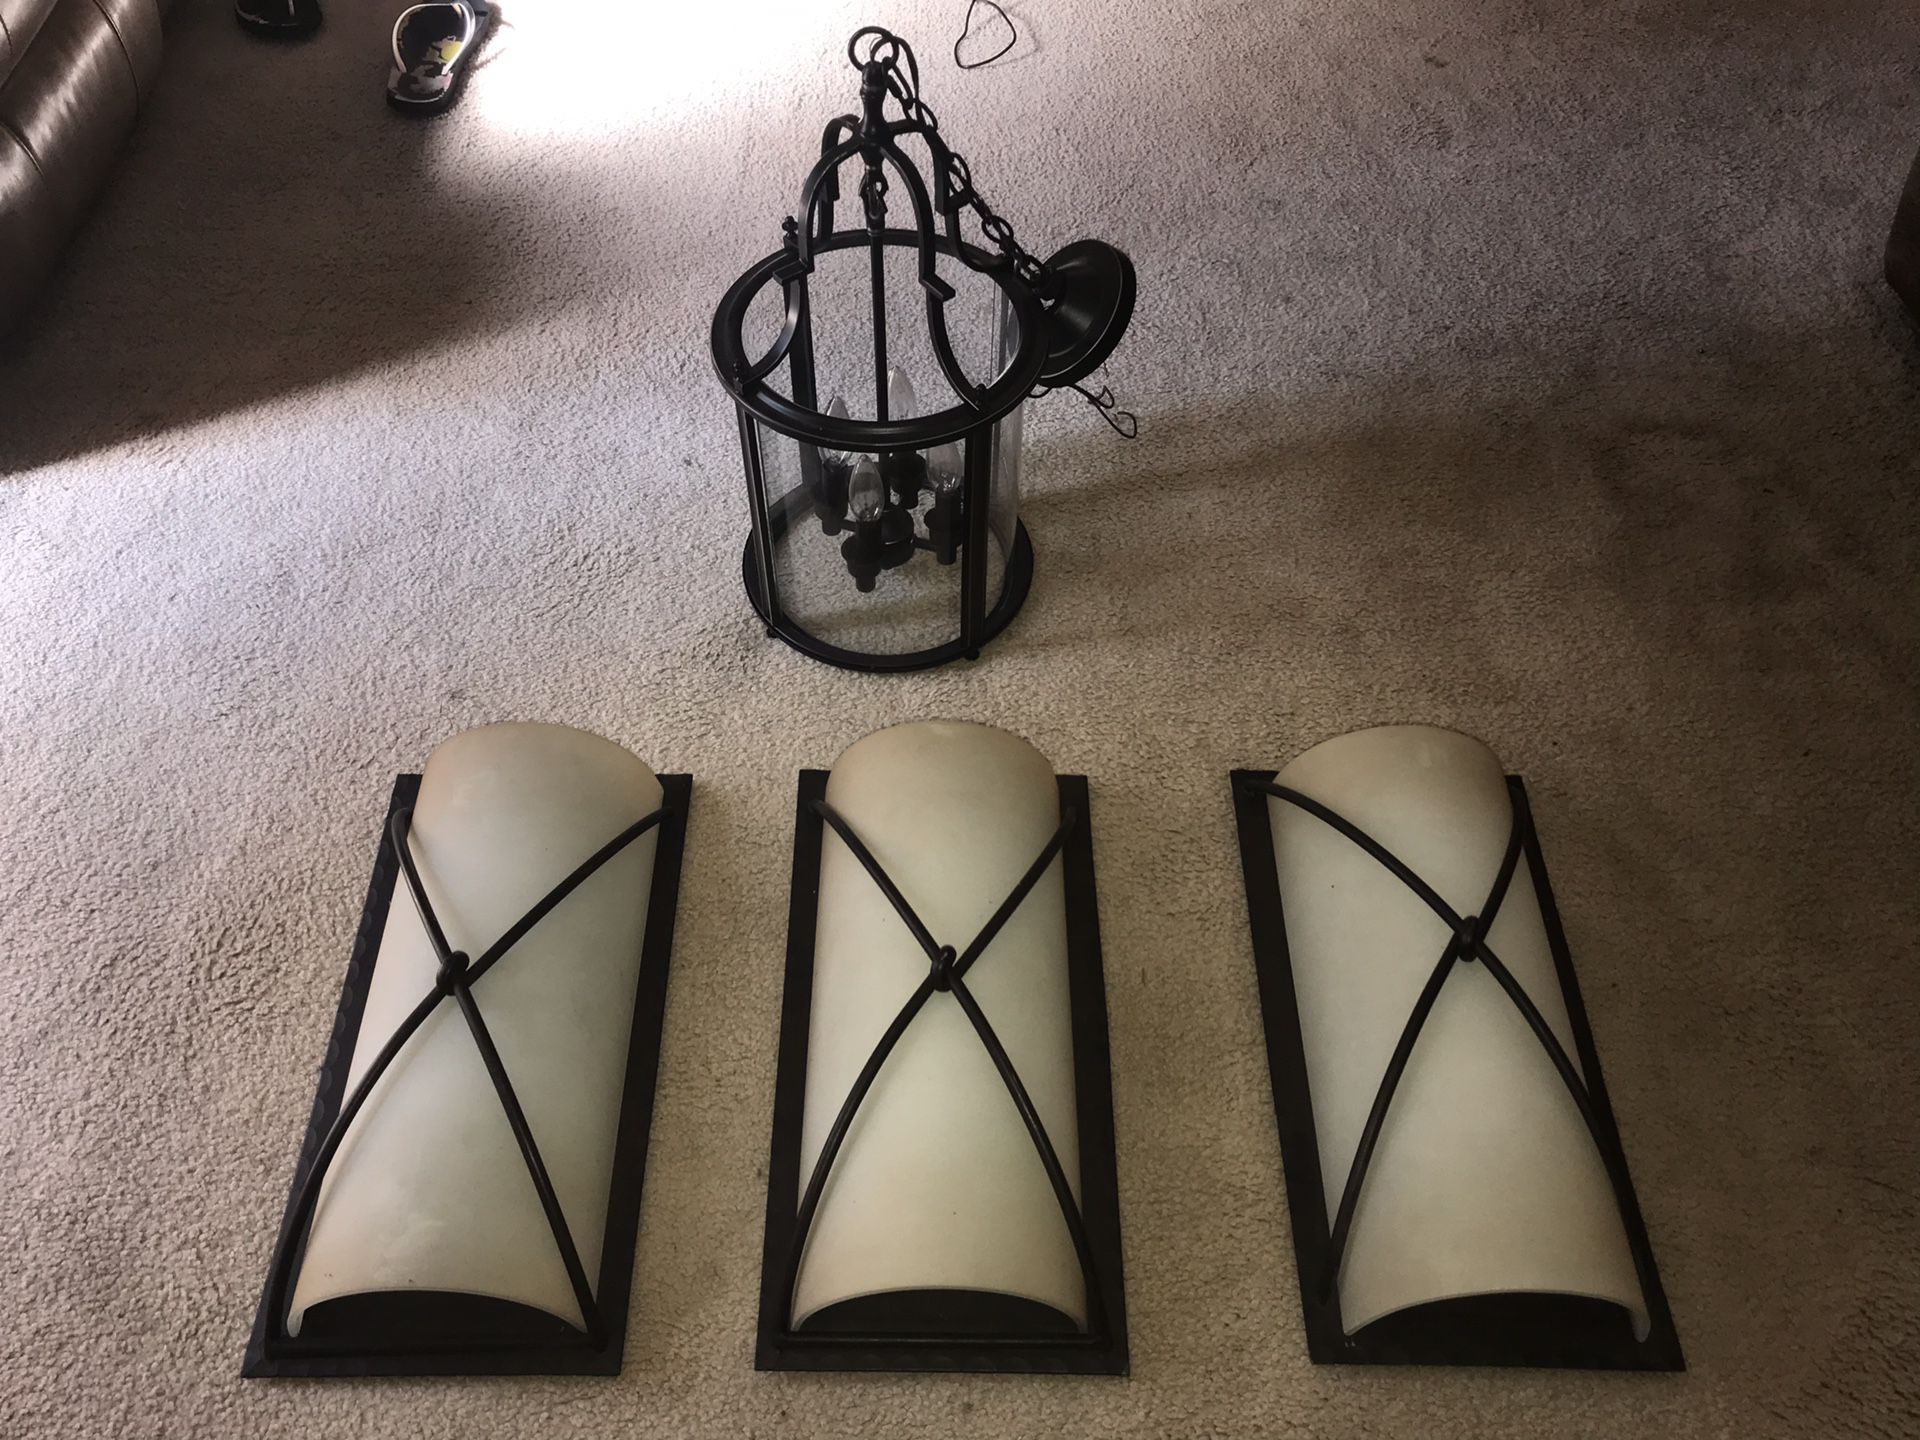 1 beautiful chandelier with 3 matching wall sconces. Worth over $1600... see pics of prices listed on amazon...